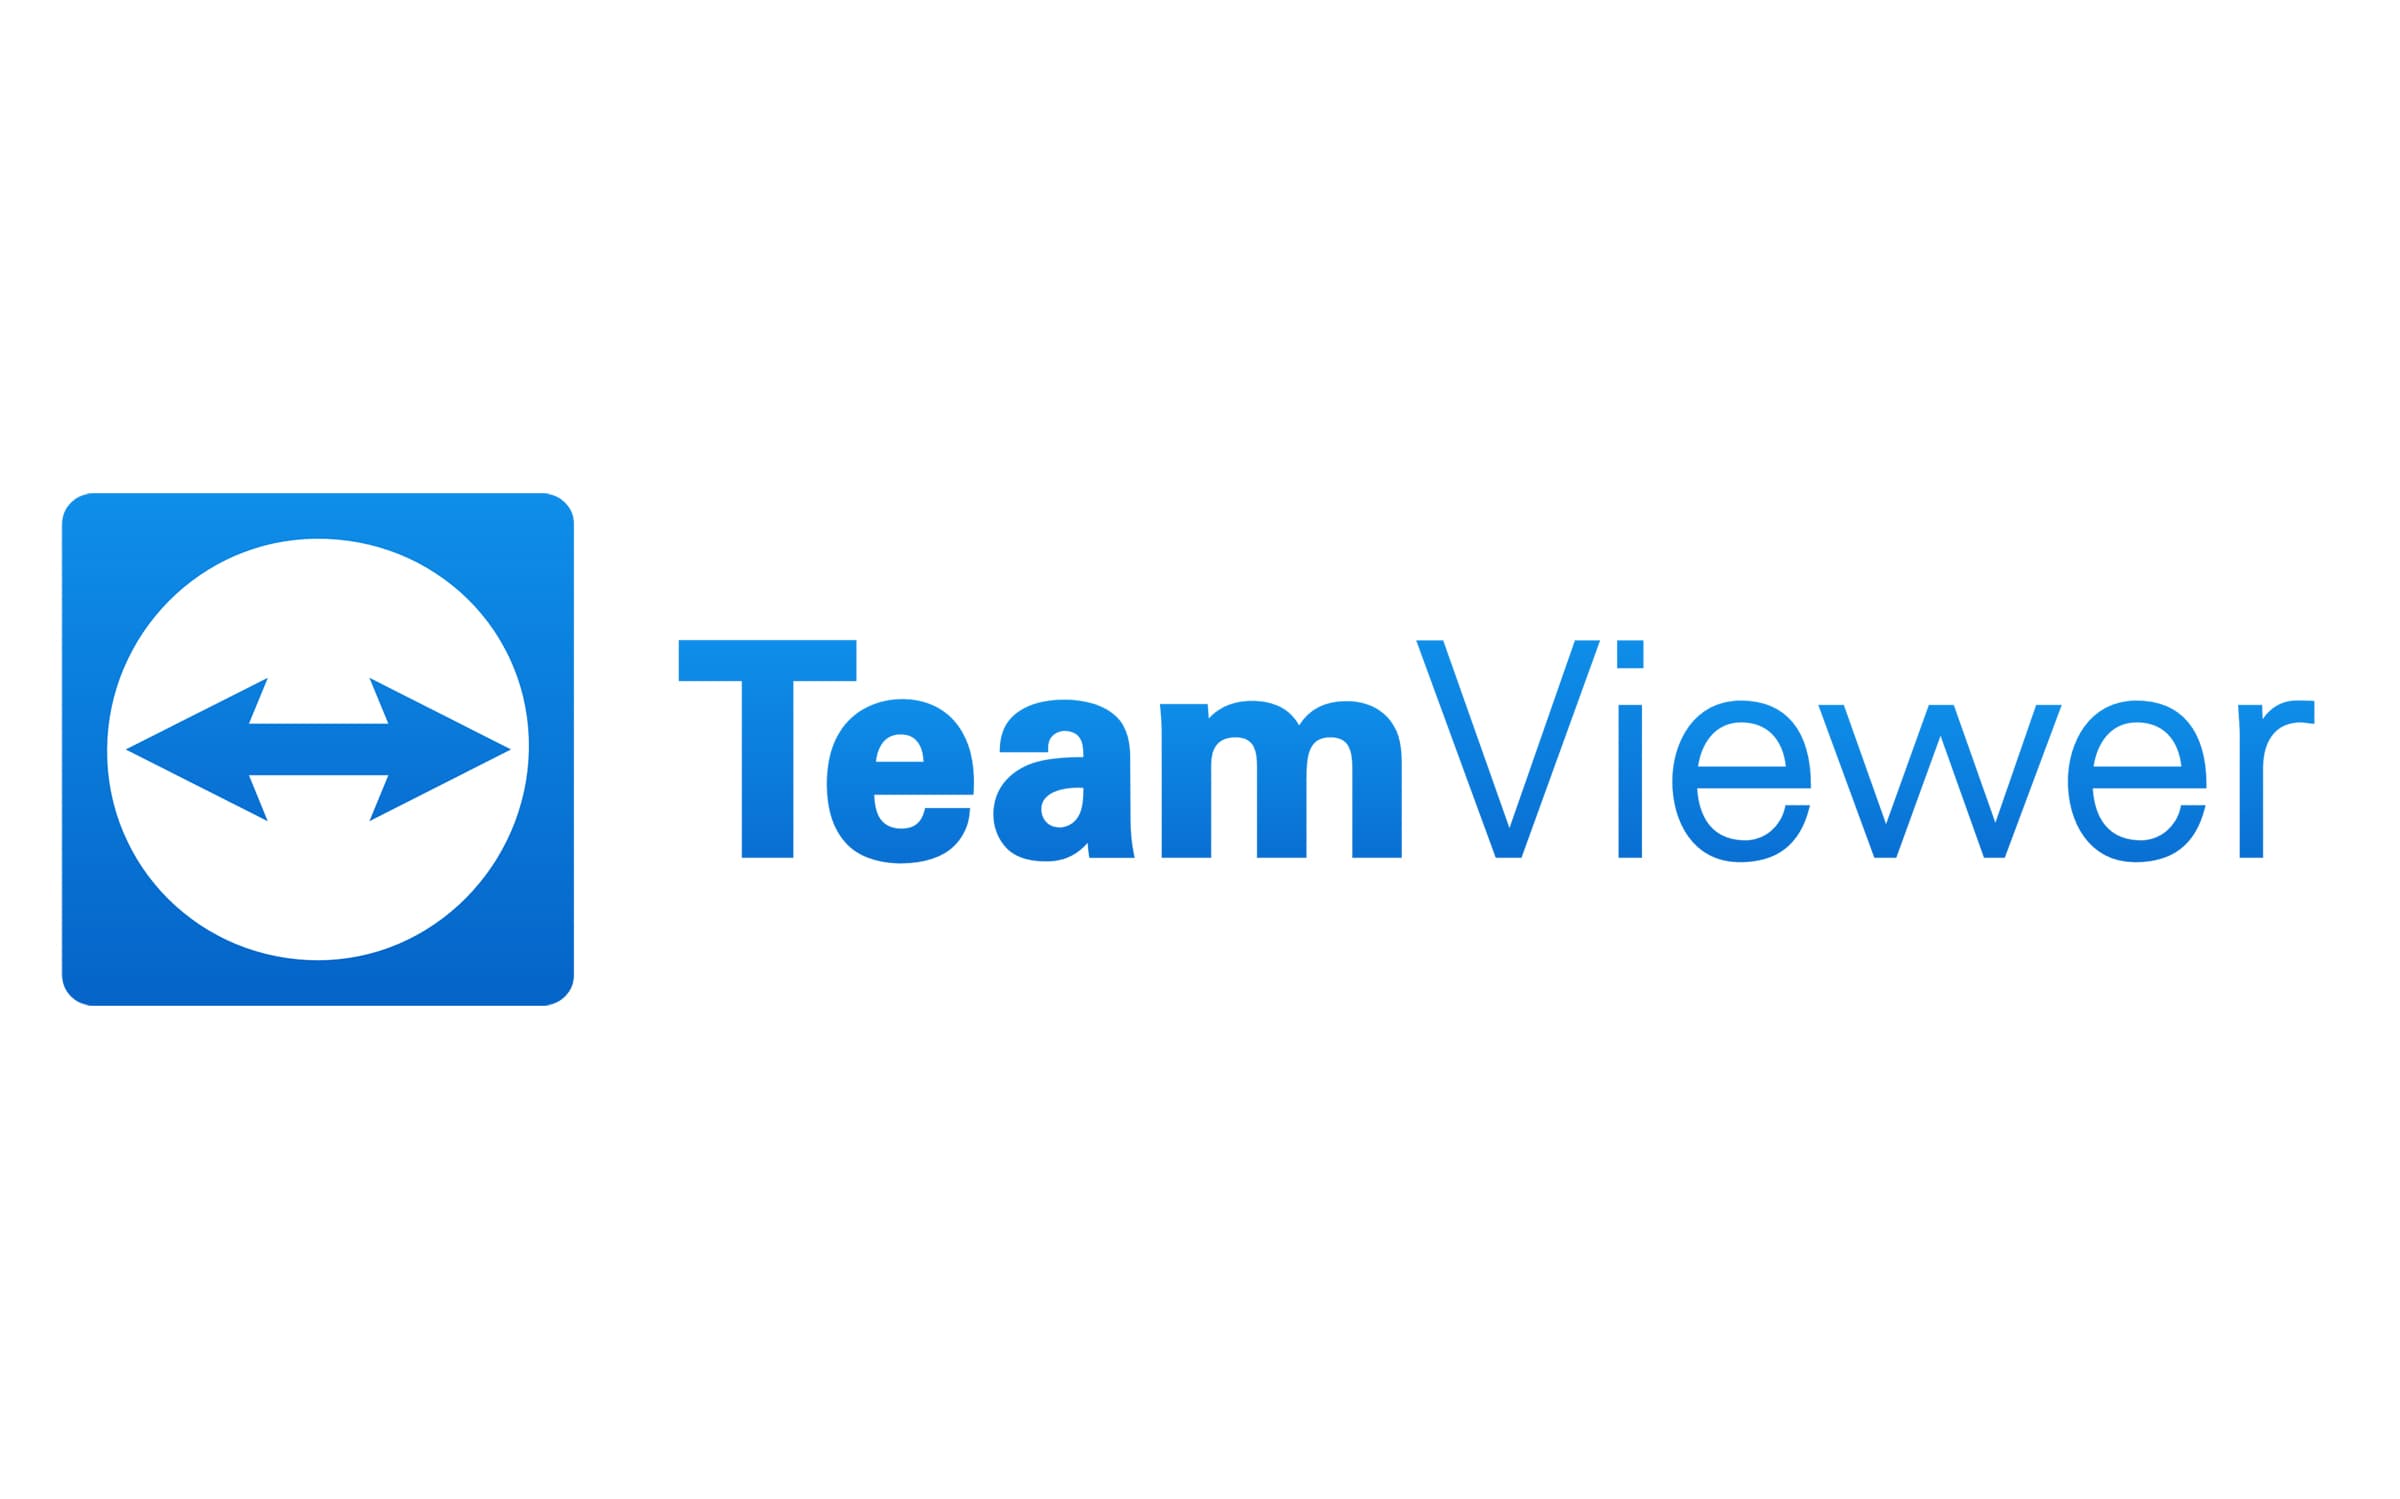 teamviewer trial expired when not logged in